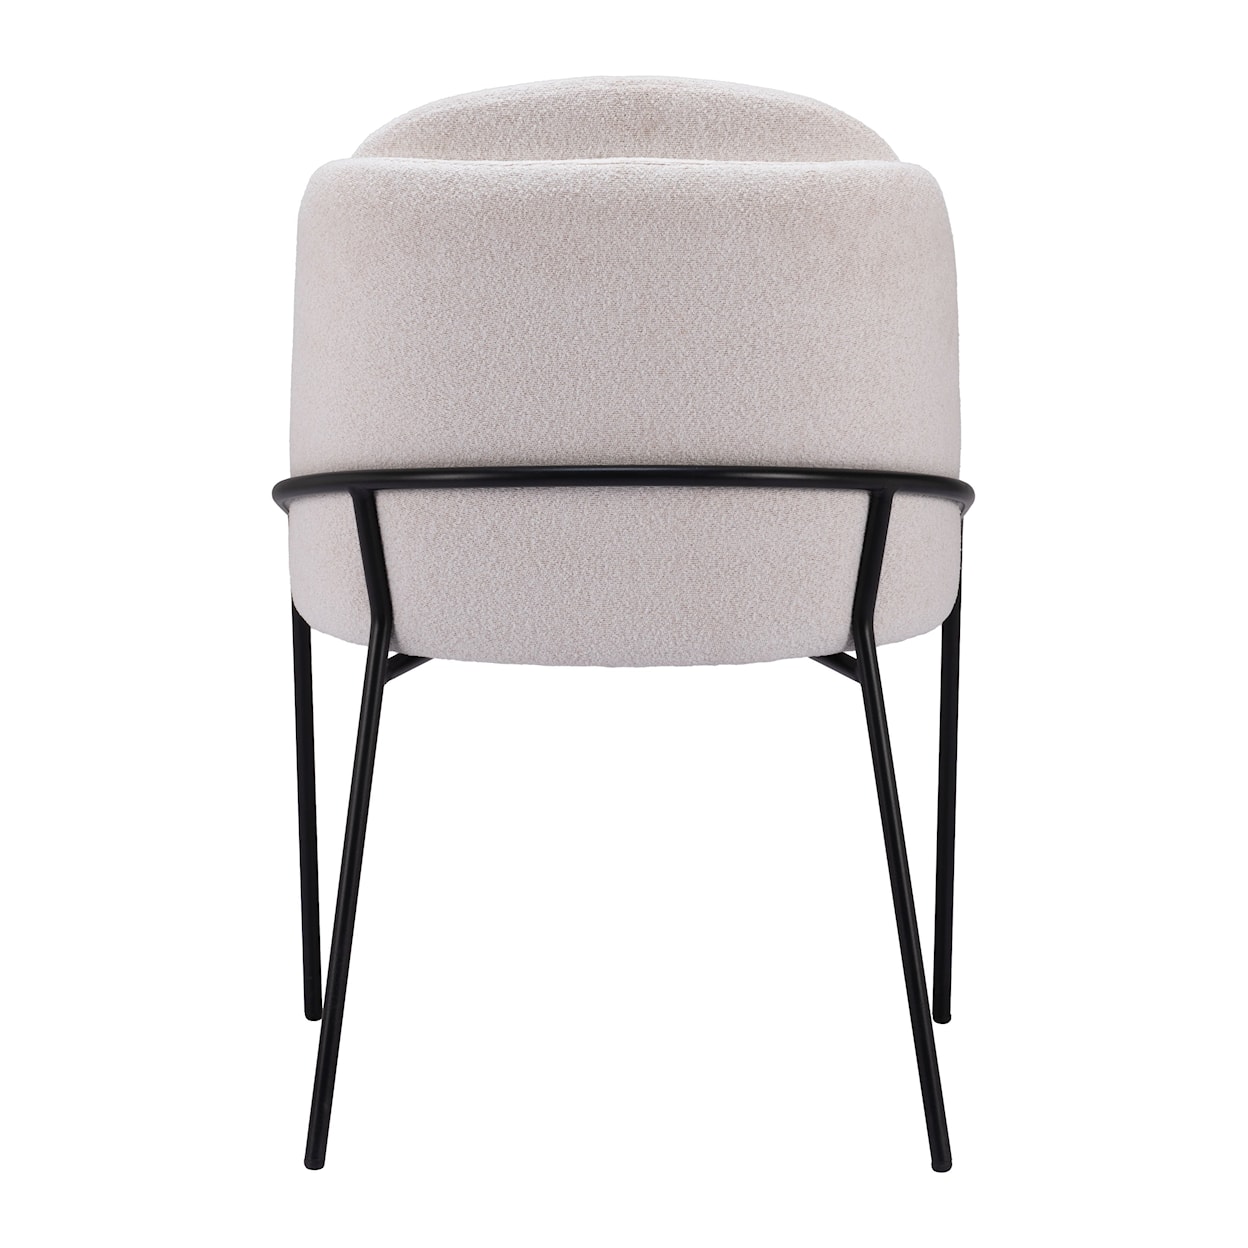 Zuo Jambi Collection Dining Chair